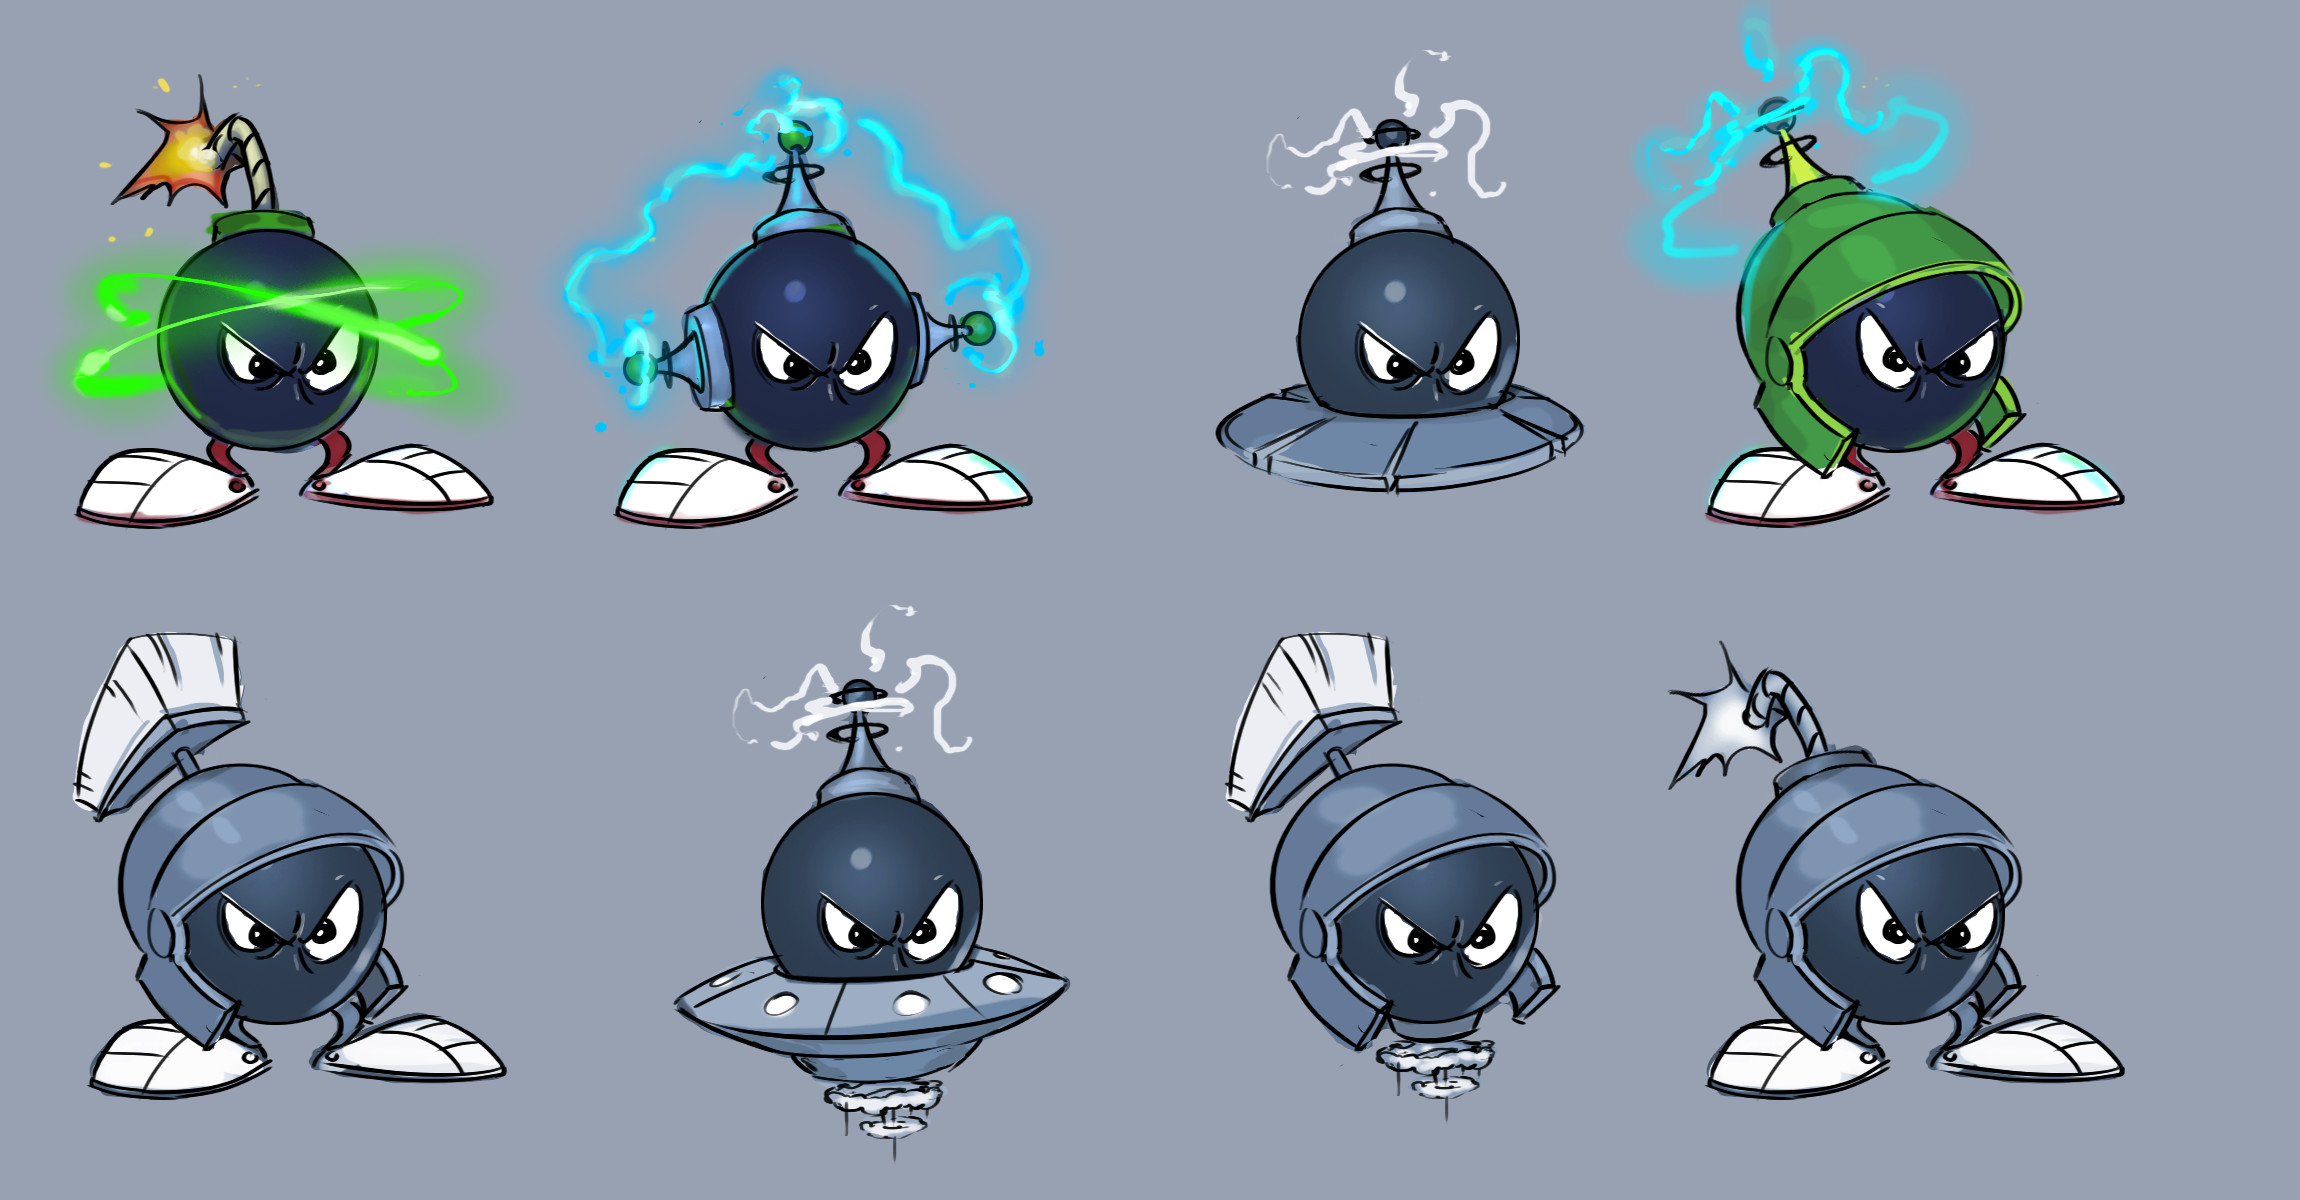 Bomb blocker exploration. These are obviously based off of Marvin the Martian's head.